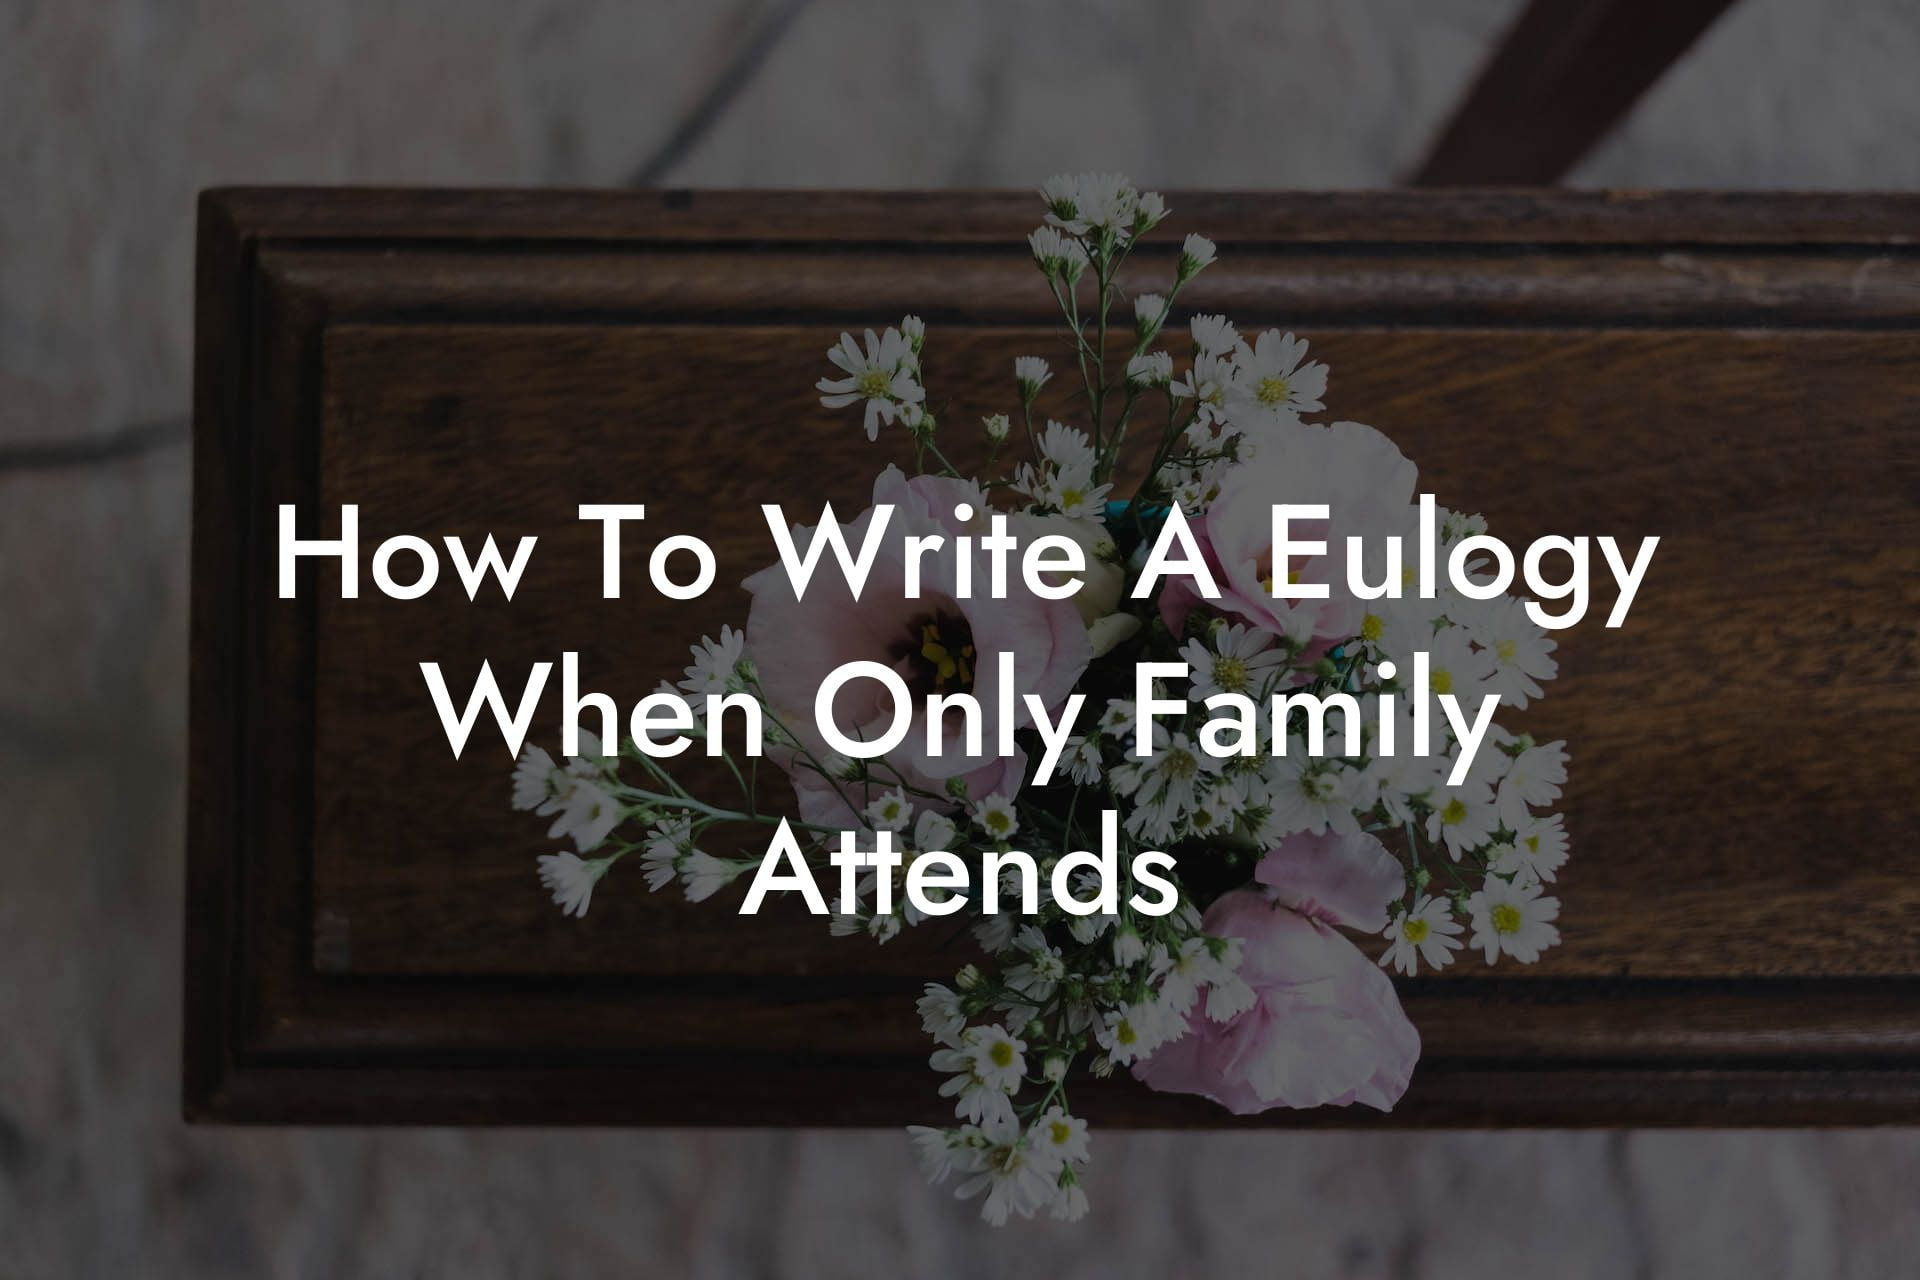 How To Write A Eulogy When Only Family Attends